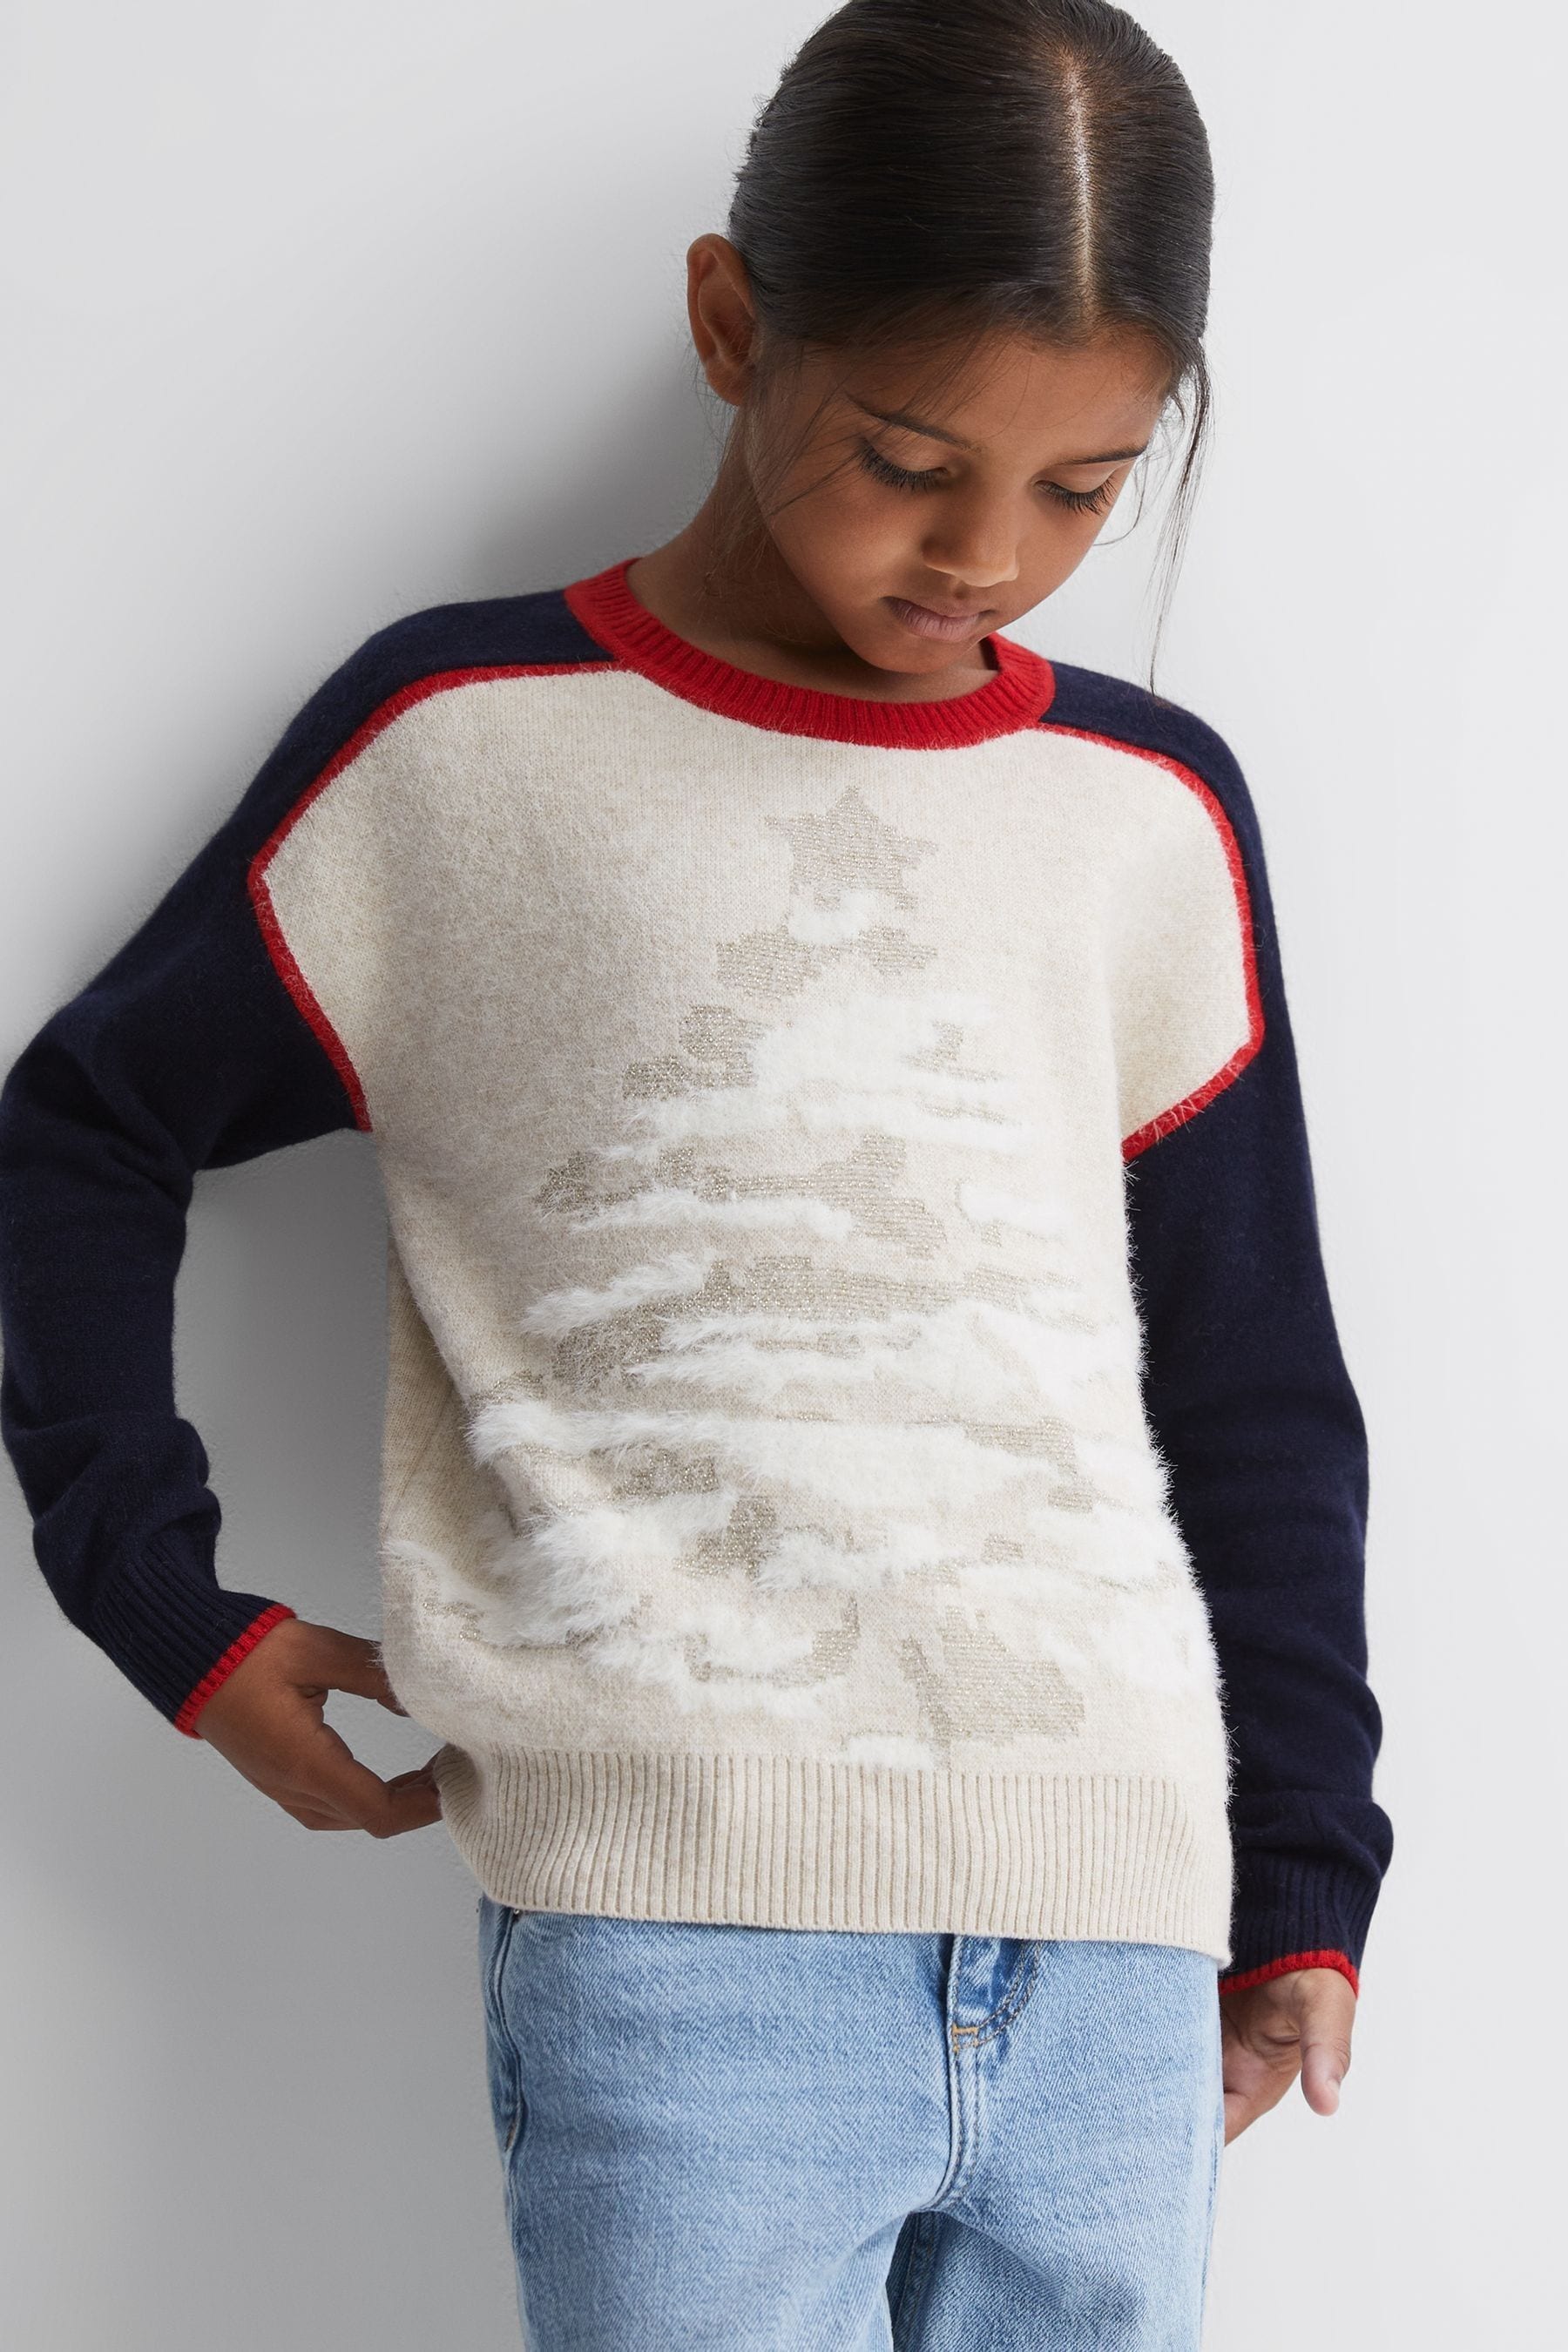 Reiss Kids' Tilly - Blue Junior Casual Knitted Festive Jumper, Age 8-9 Years